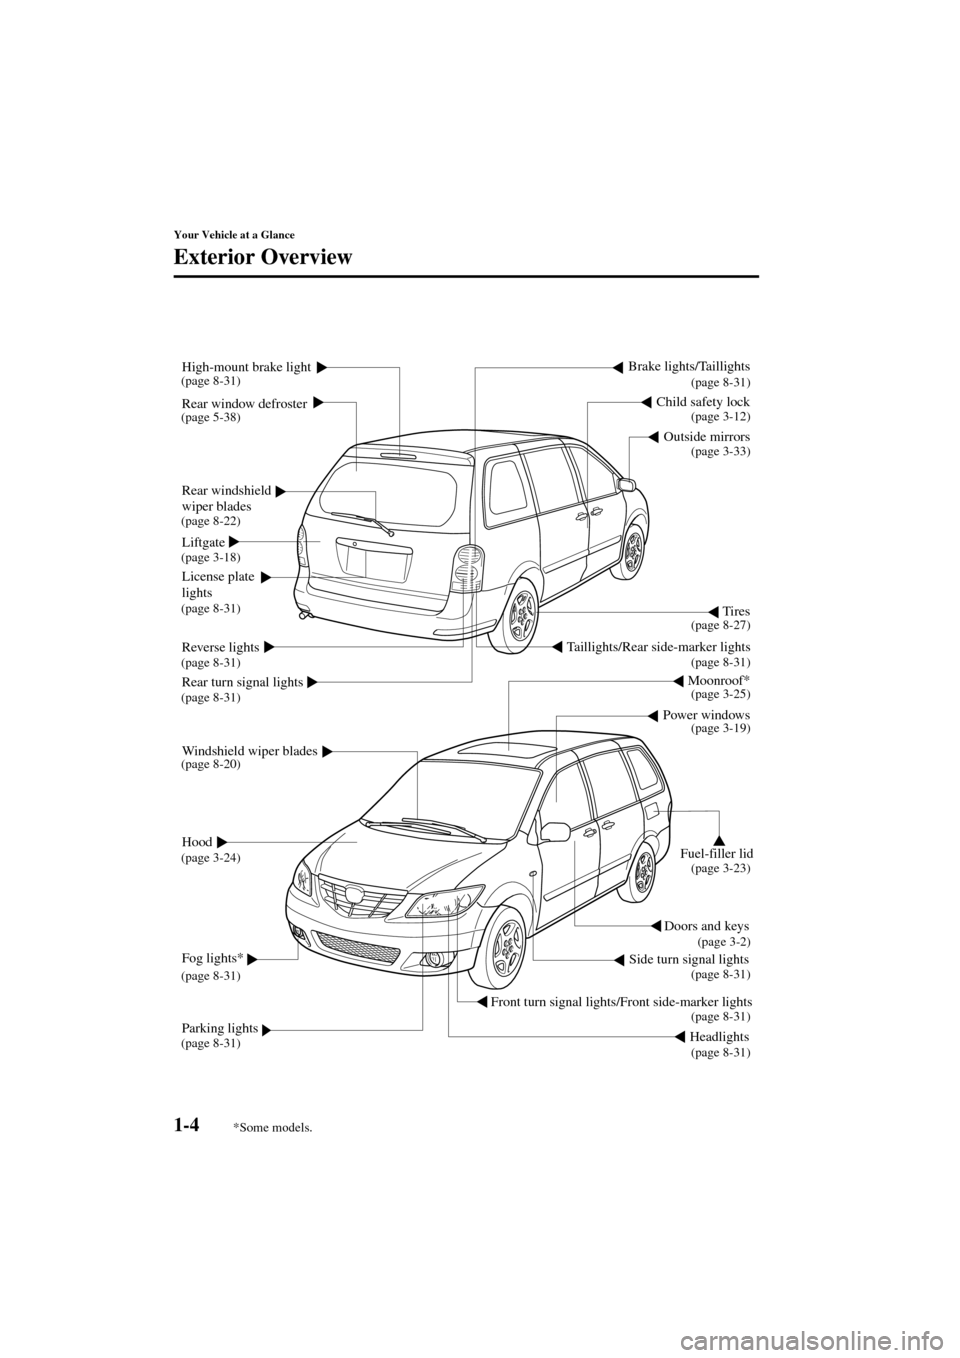 MAZDA MODEL MPV 2004  Owners Manual (in English) 1-4
Your Vehicle at a Glance
Form No. 8S06-EA-03H
Exterior Overview
Windshield wiper blades
Power windows
Hood
Fog lights*
Front turn signal lights/Front side-marker lights
Headlights
Fuel-filler lid
